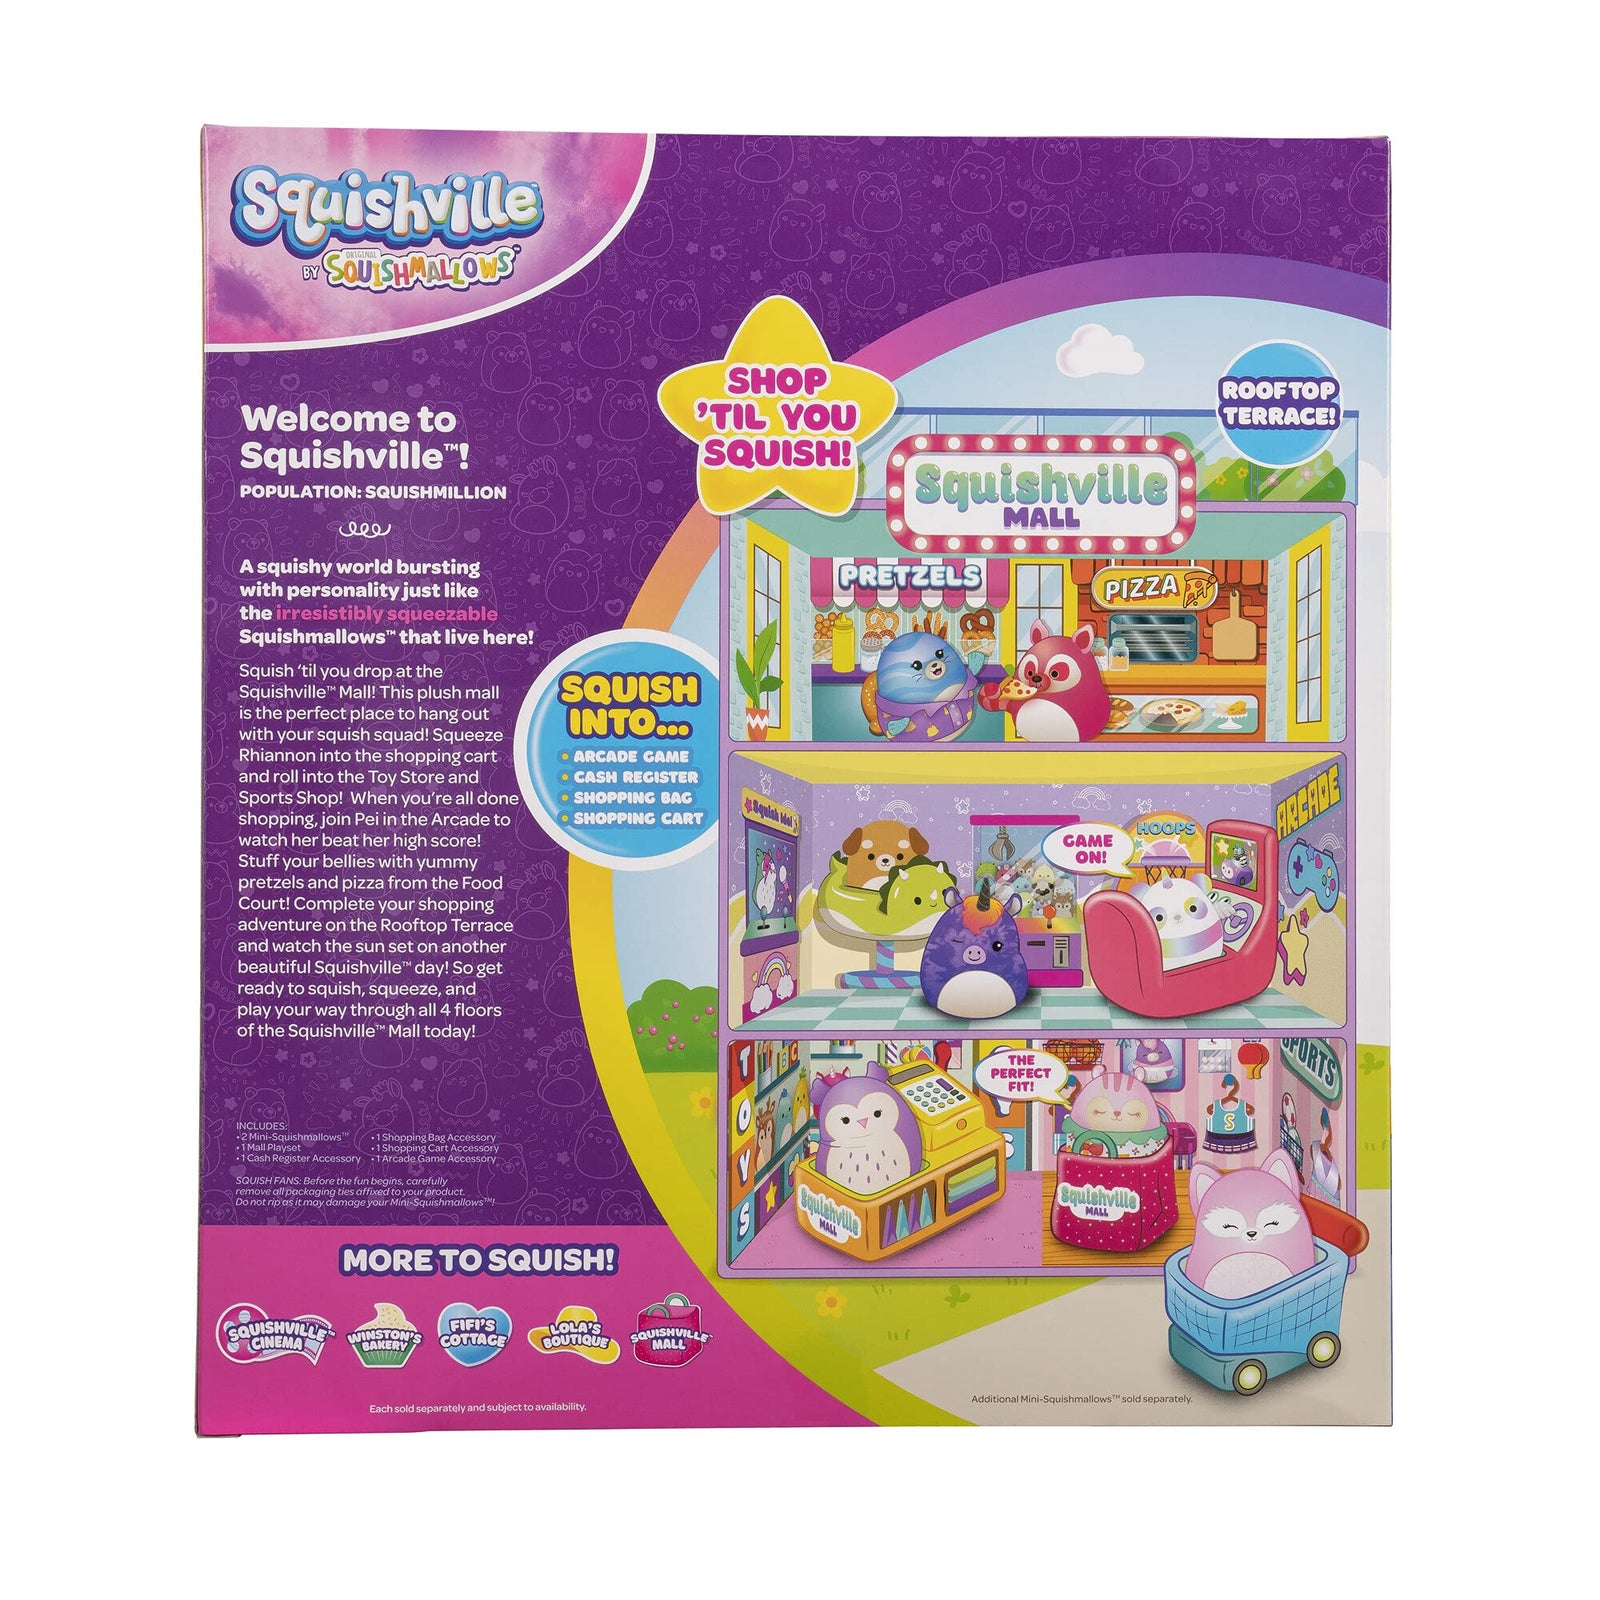 Squishville Squishmallows Mall - Two 2-Inch Mini-Squishmallows Plush Characters, Themed Play Scene, 4 Accessories (Shopping Bag, Shopping Cart, Cash Register, Arcade Machine) - Amazon Exclusive